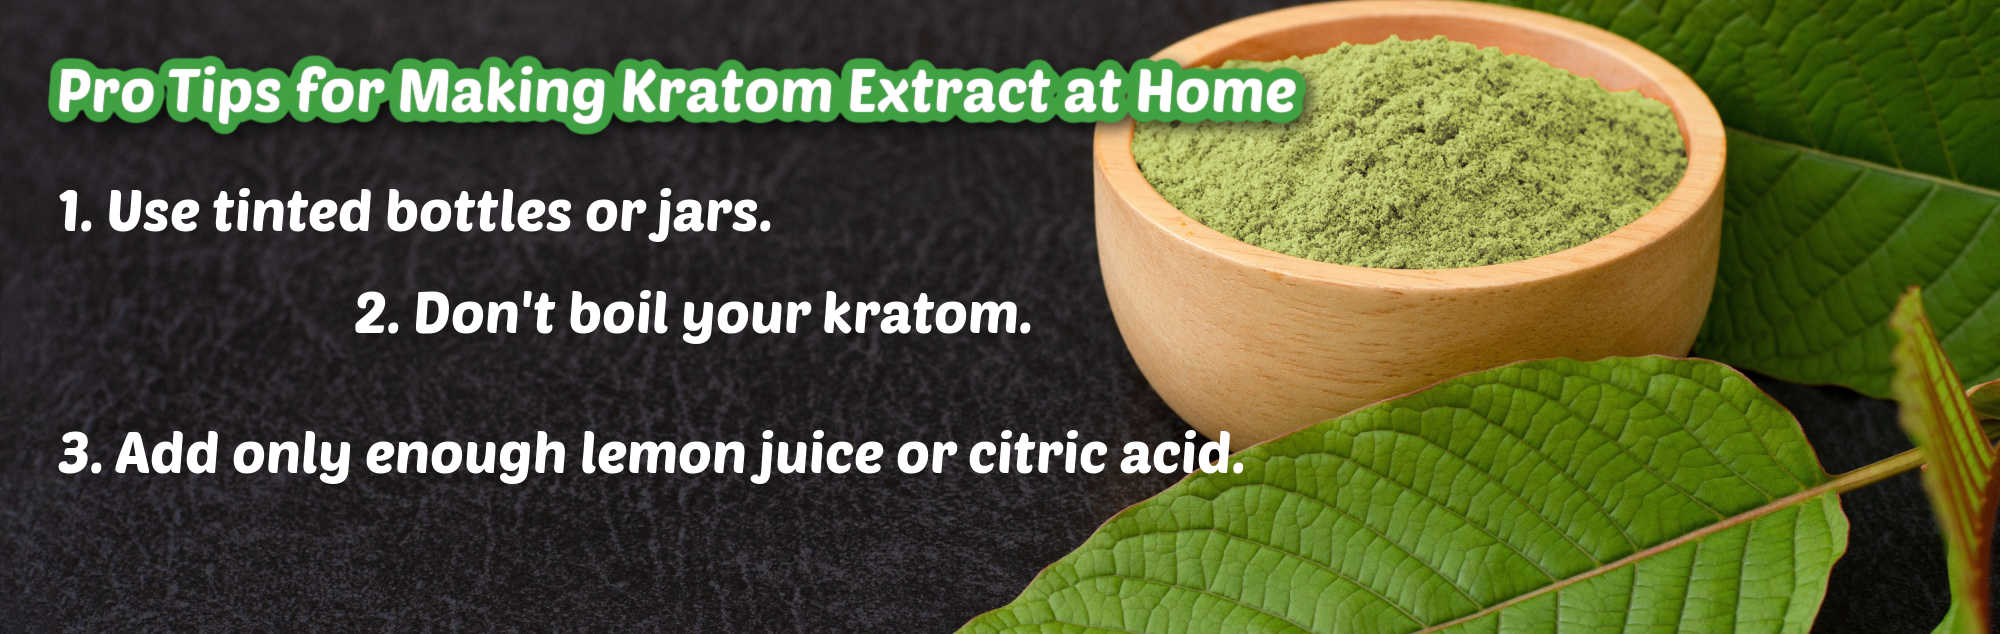 image of tips to make kratom extract at home